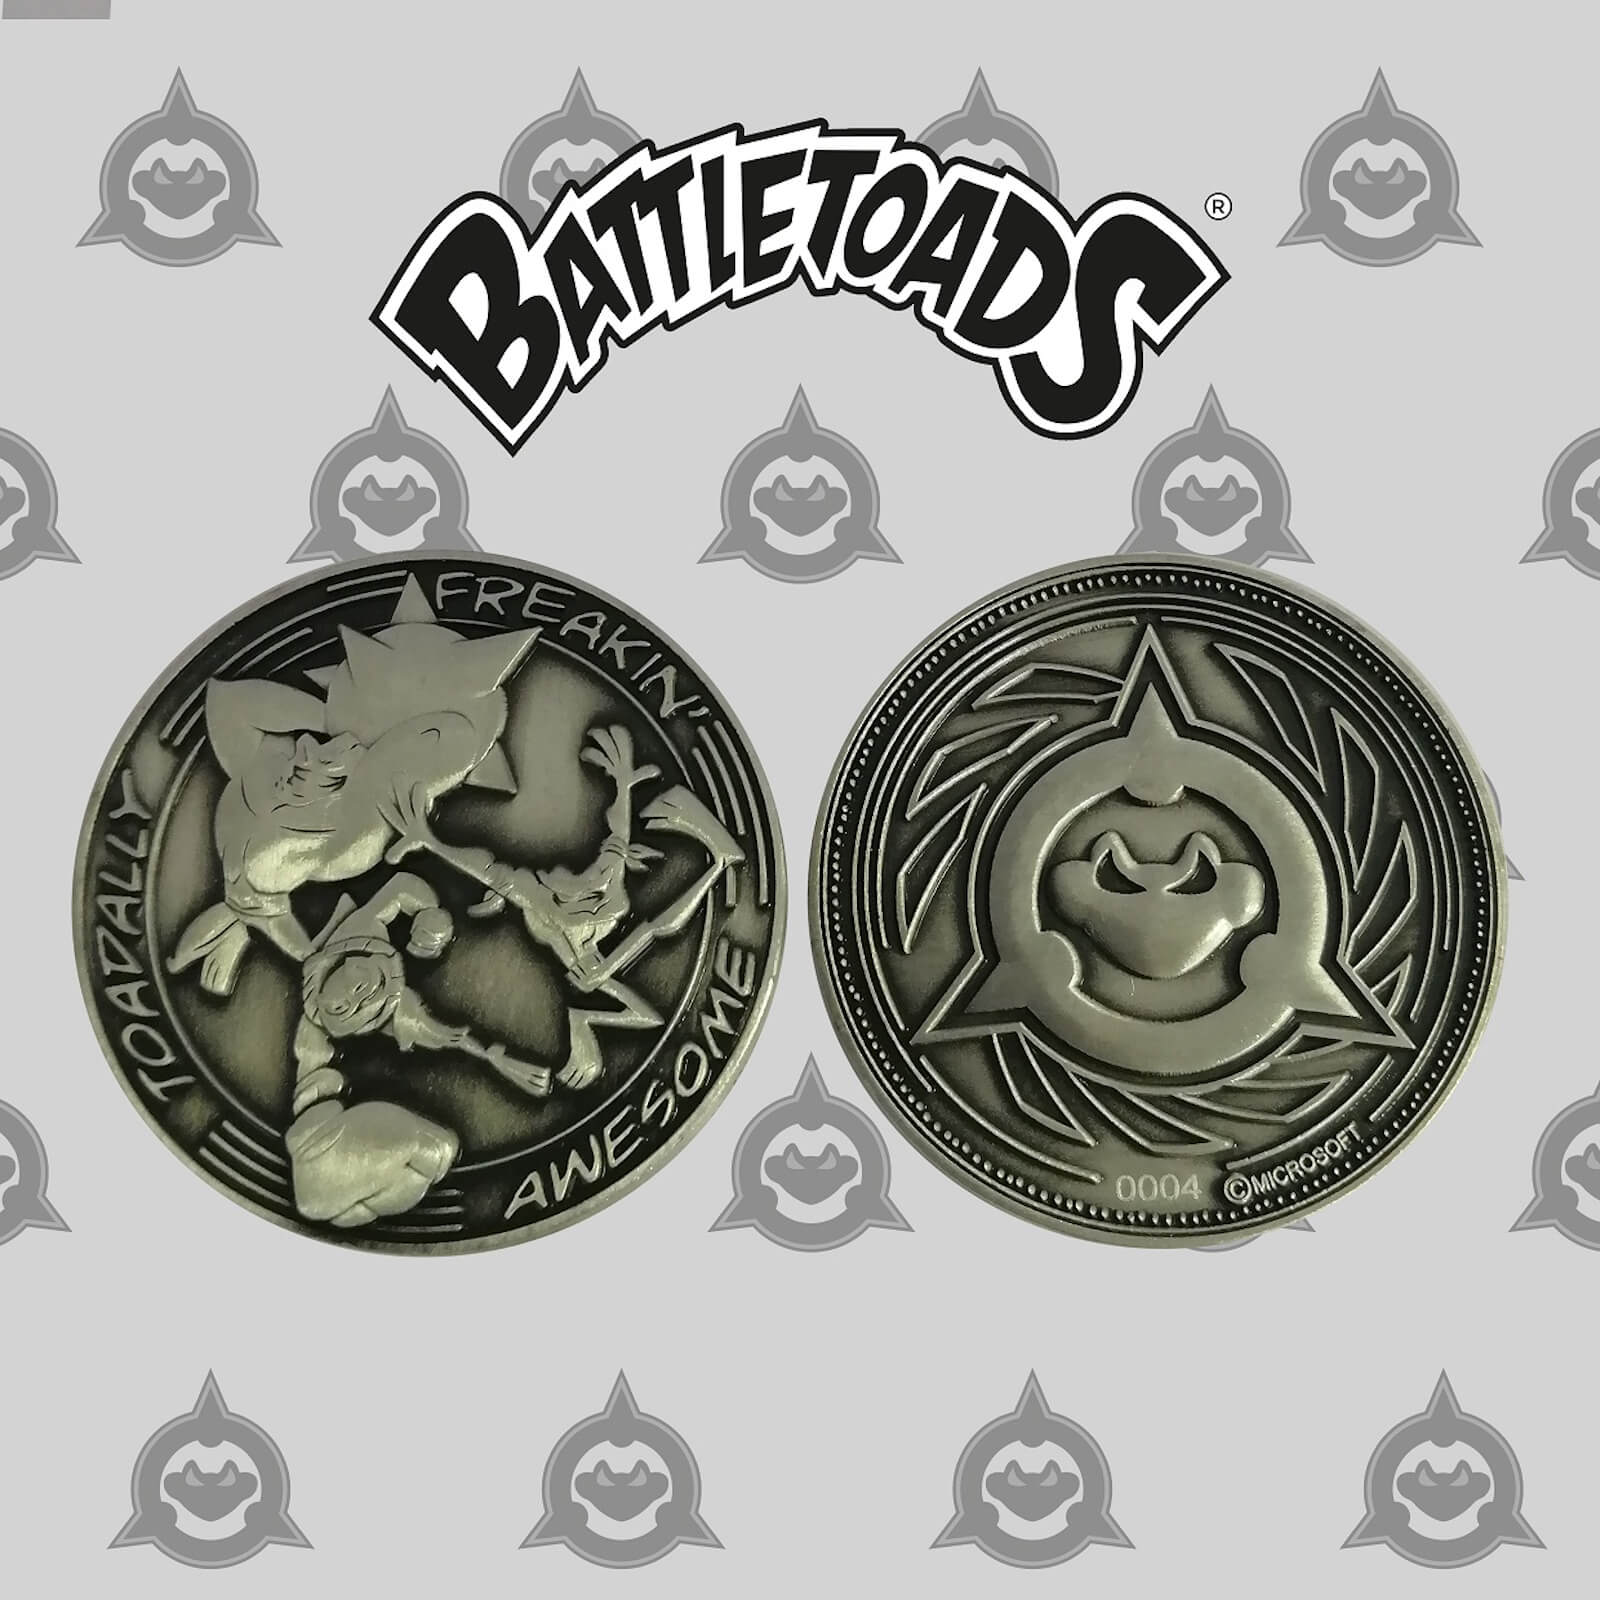 Battletoads Limited Edition Collectible Coin